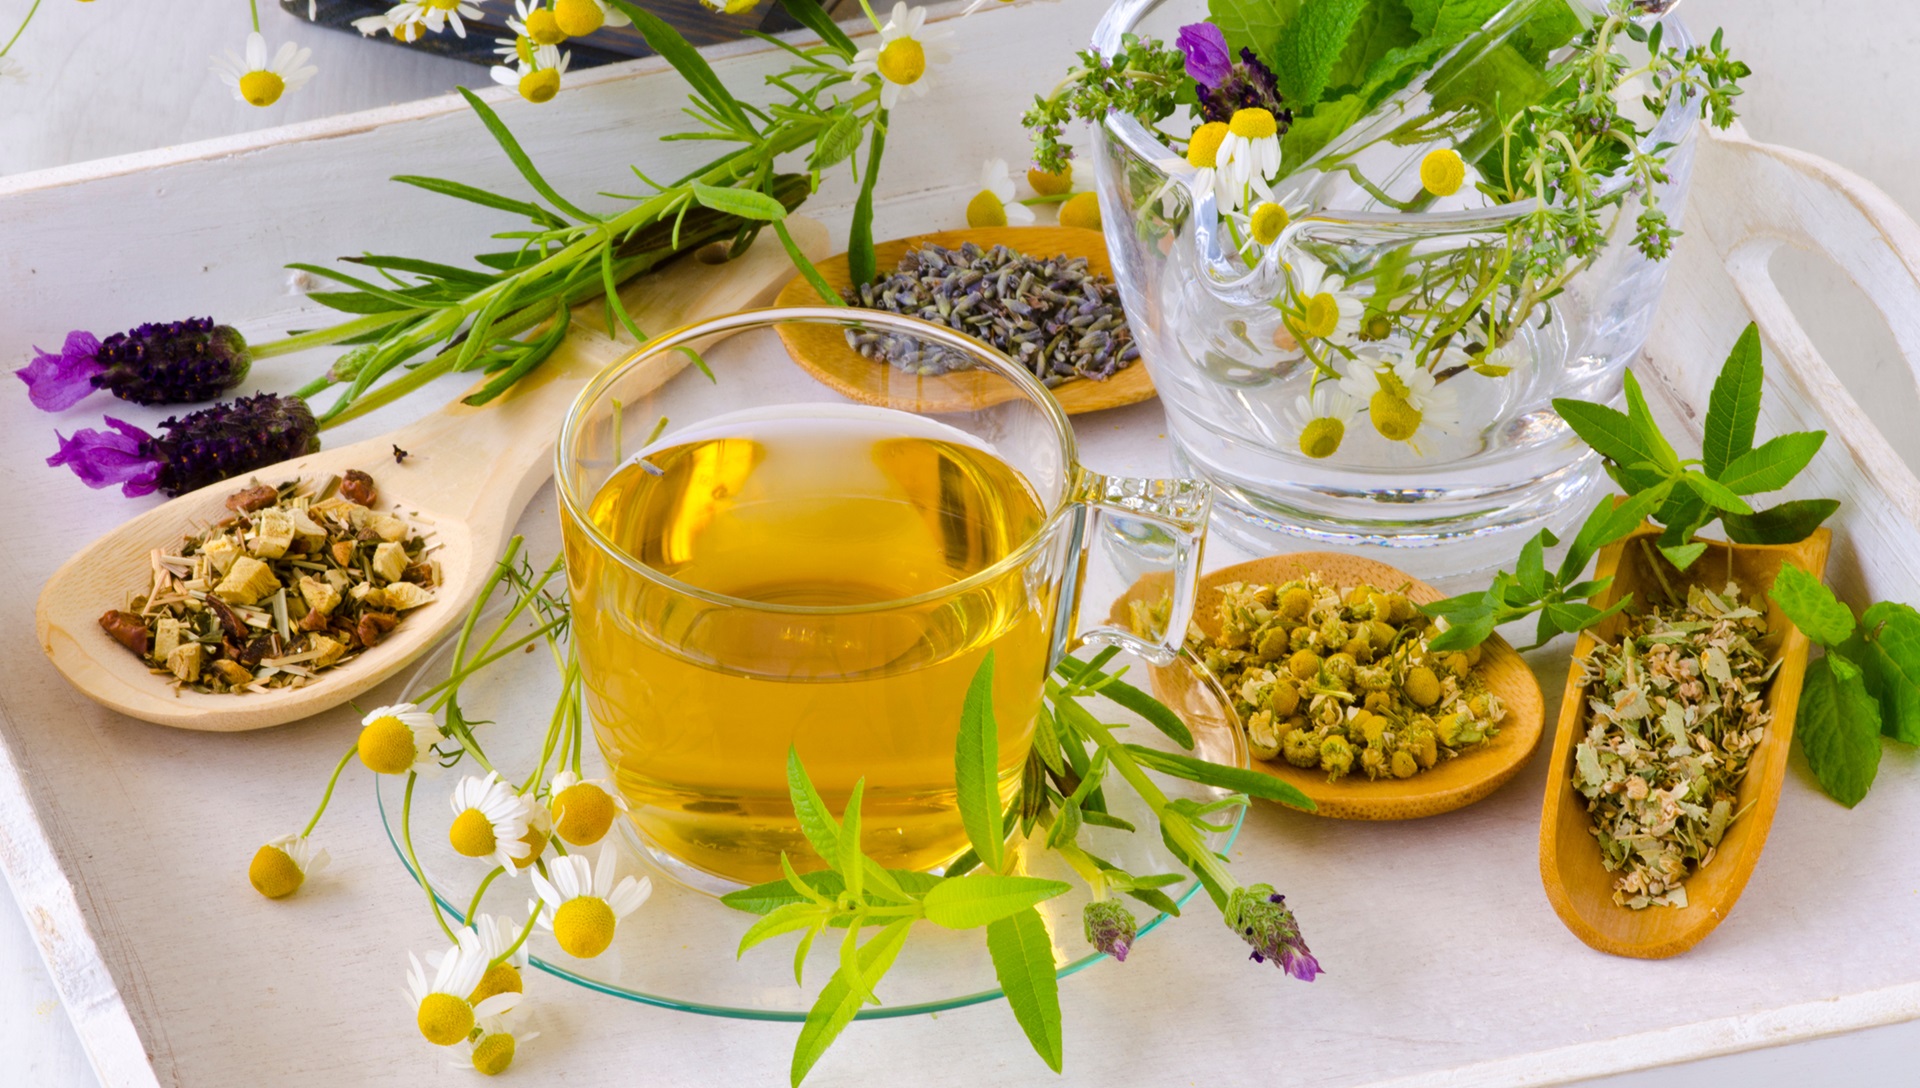 Herbal teas have been identified as a source of health-promoting fats – a healing practice